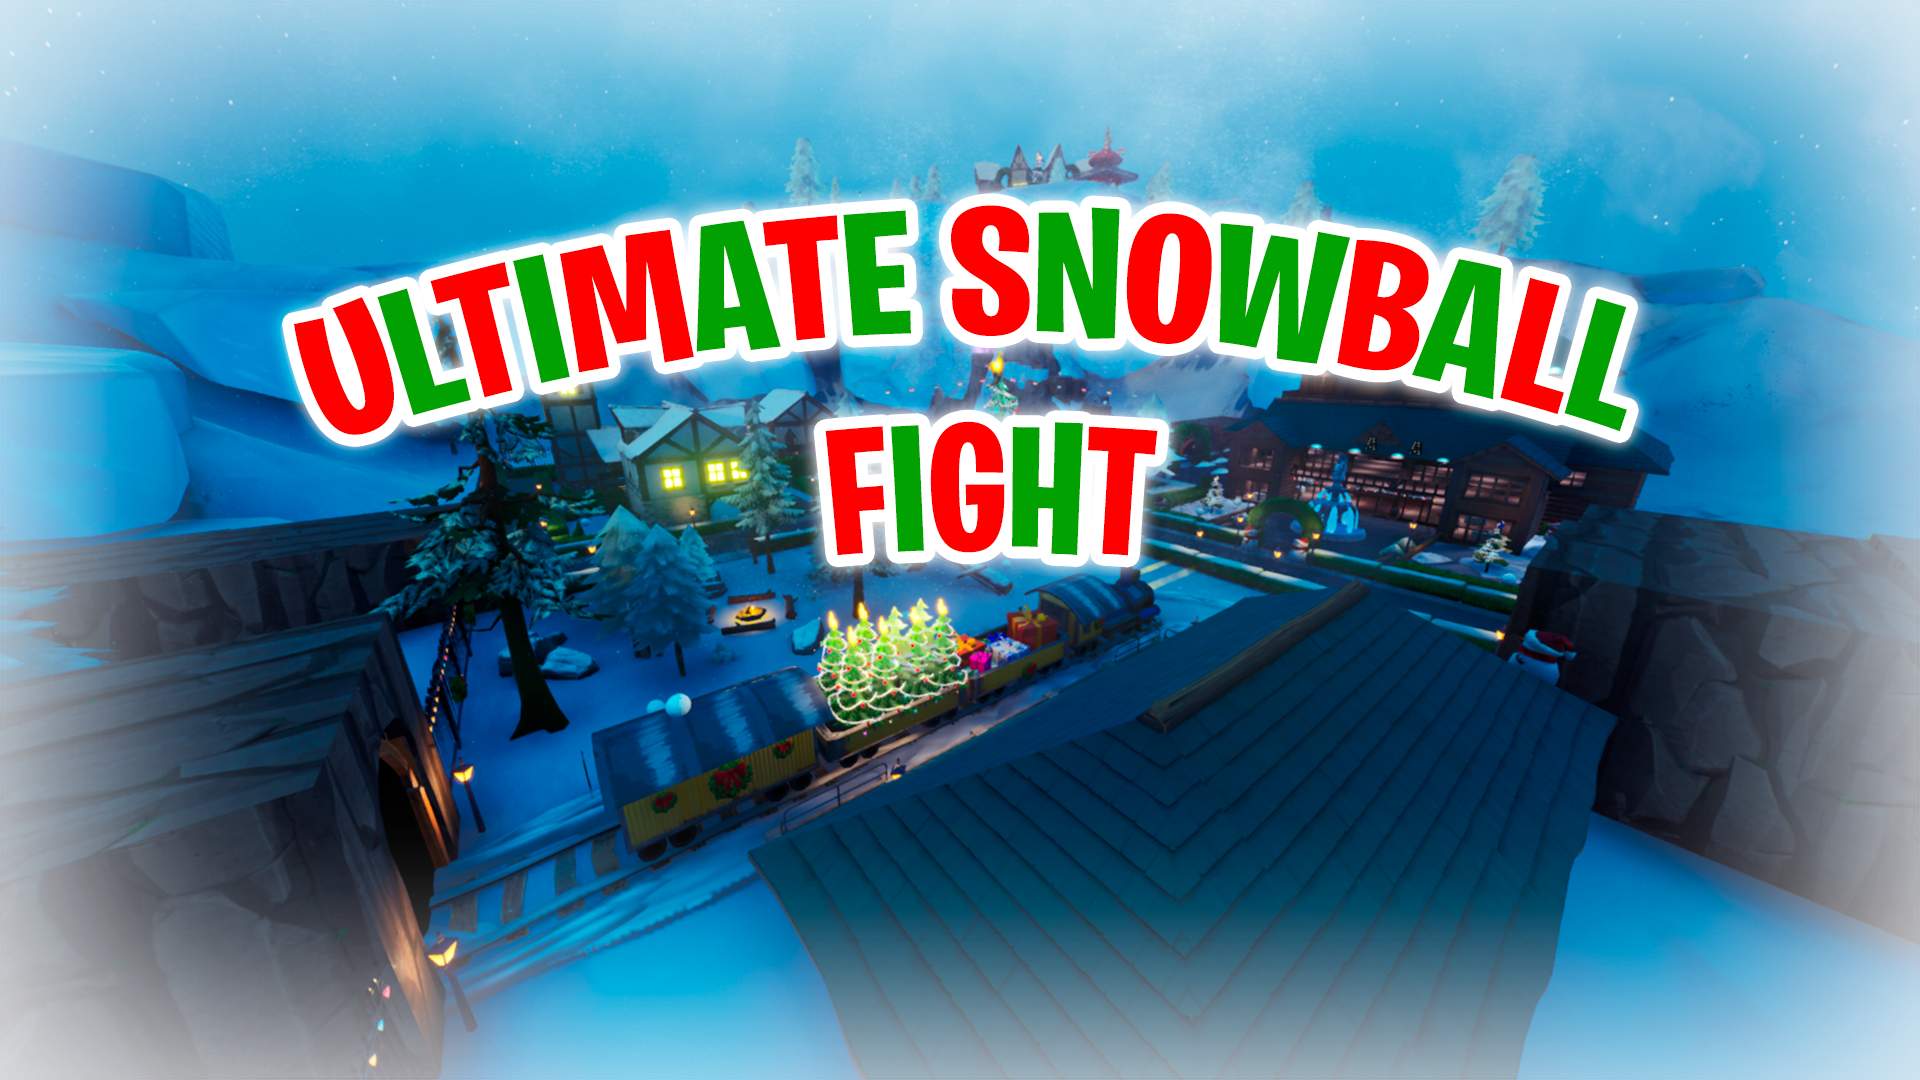 ❄🎄ULTIMATE SNOWBALL FIGHT☃❄